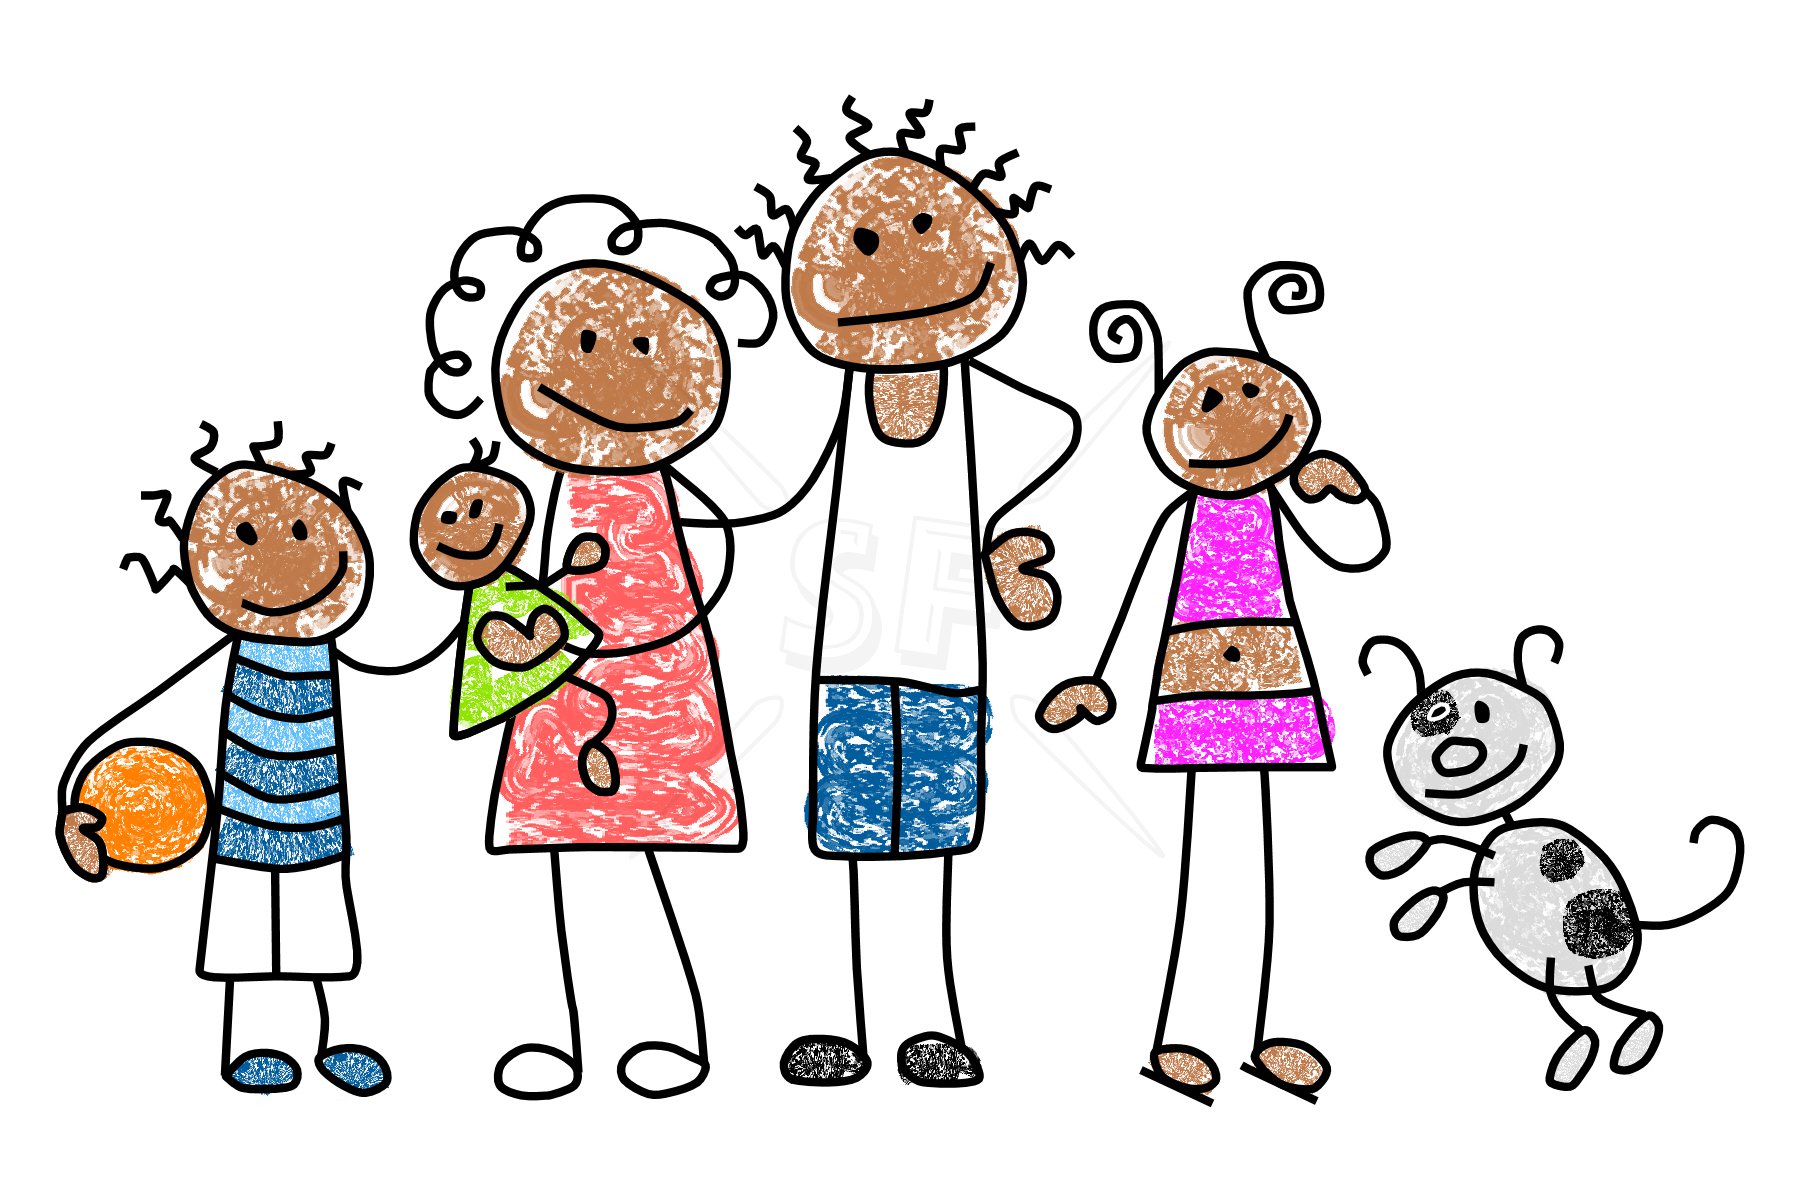 Big Family Clipart